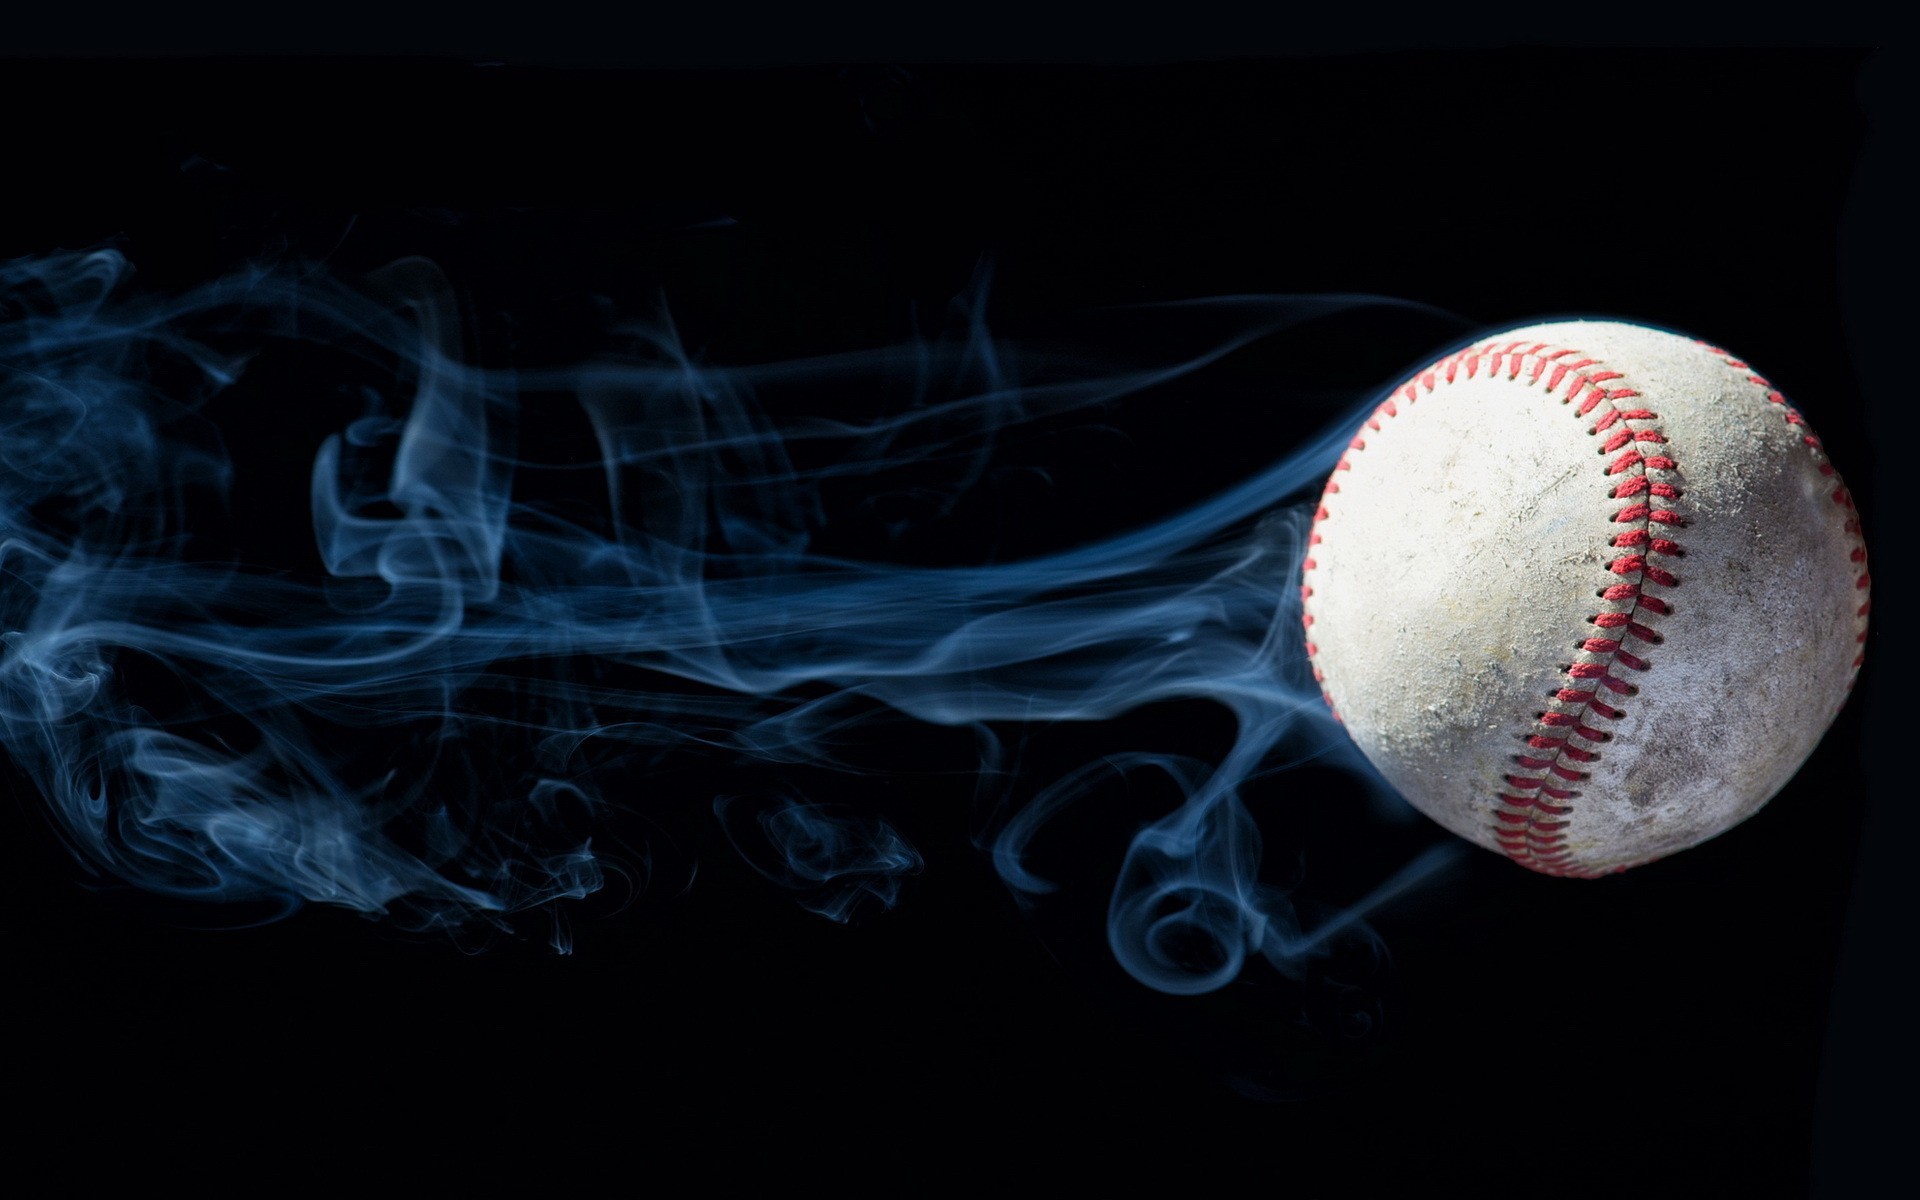 270 Baseball HD Wallpapers and Backgrounds